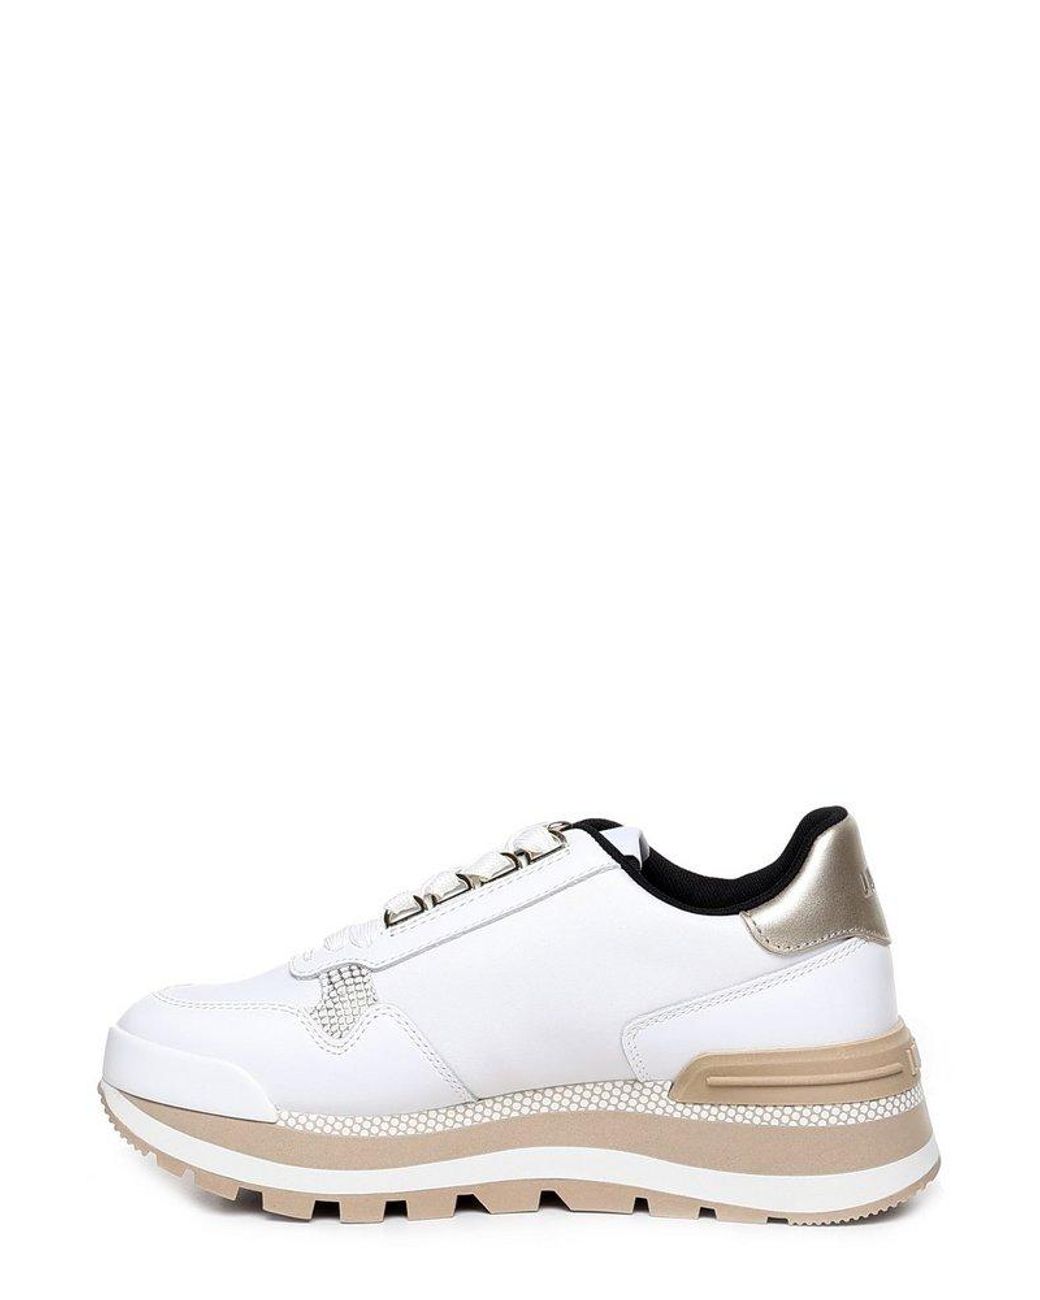 Liu Jo Amazing 15 Lace-up Sneakers in White | Lyst